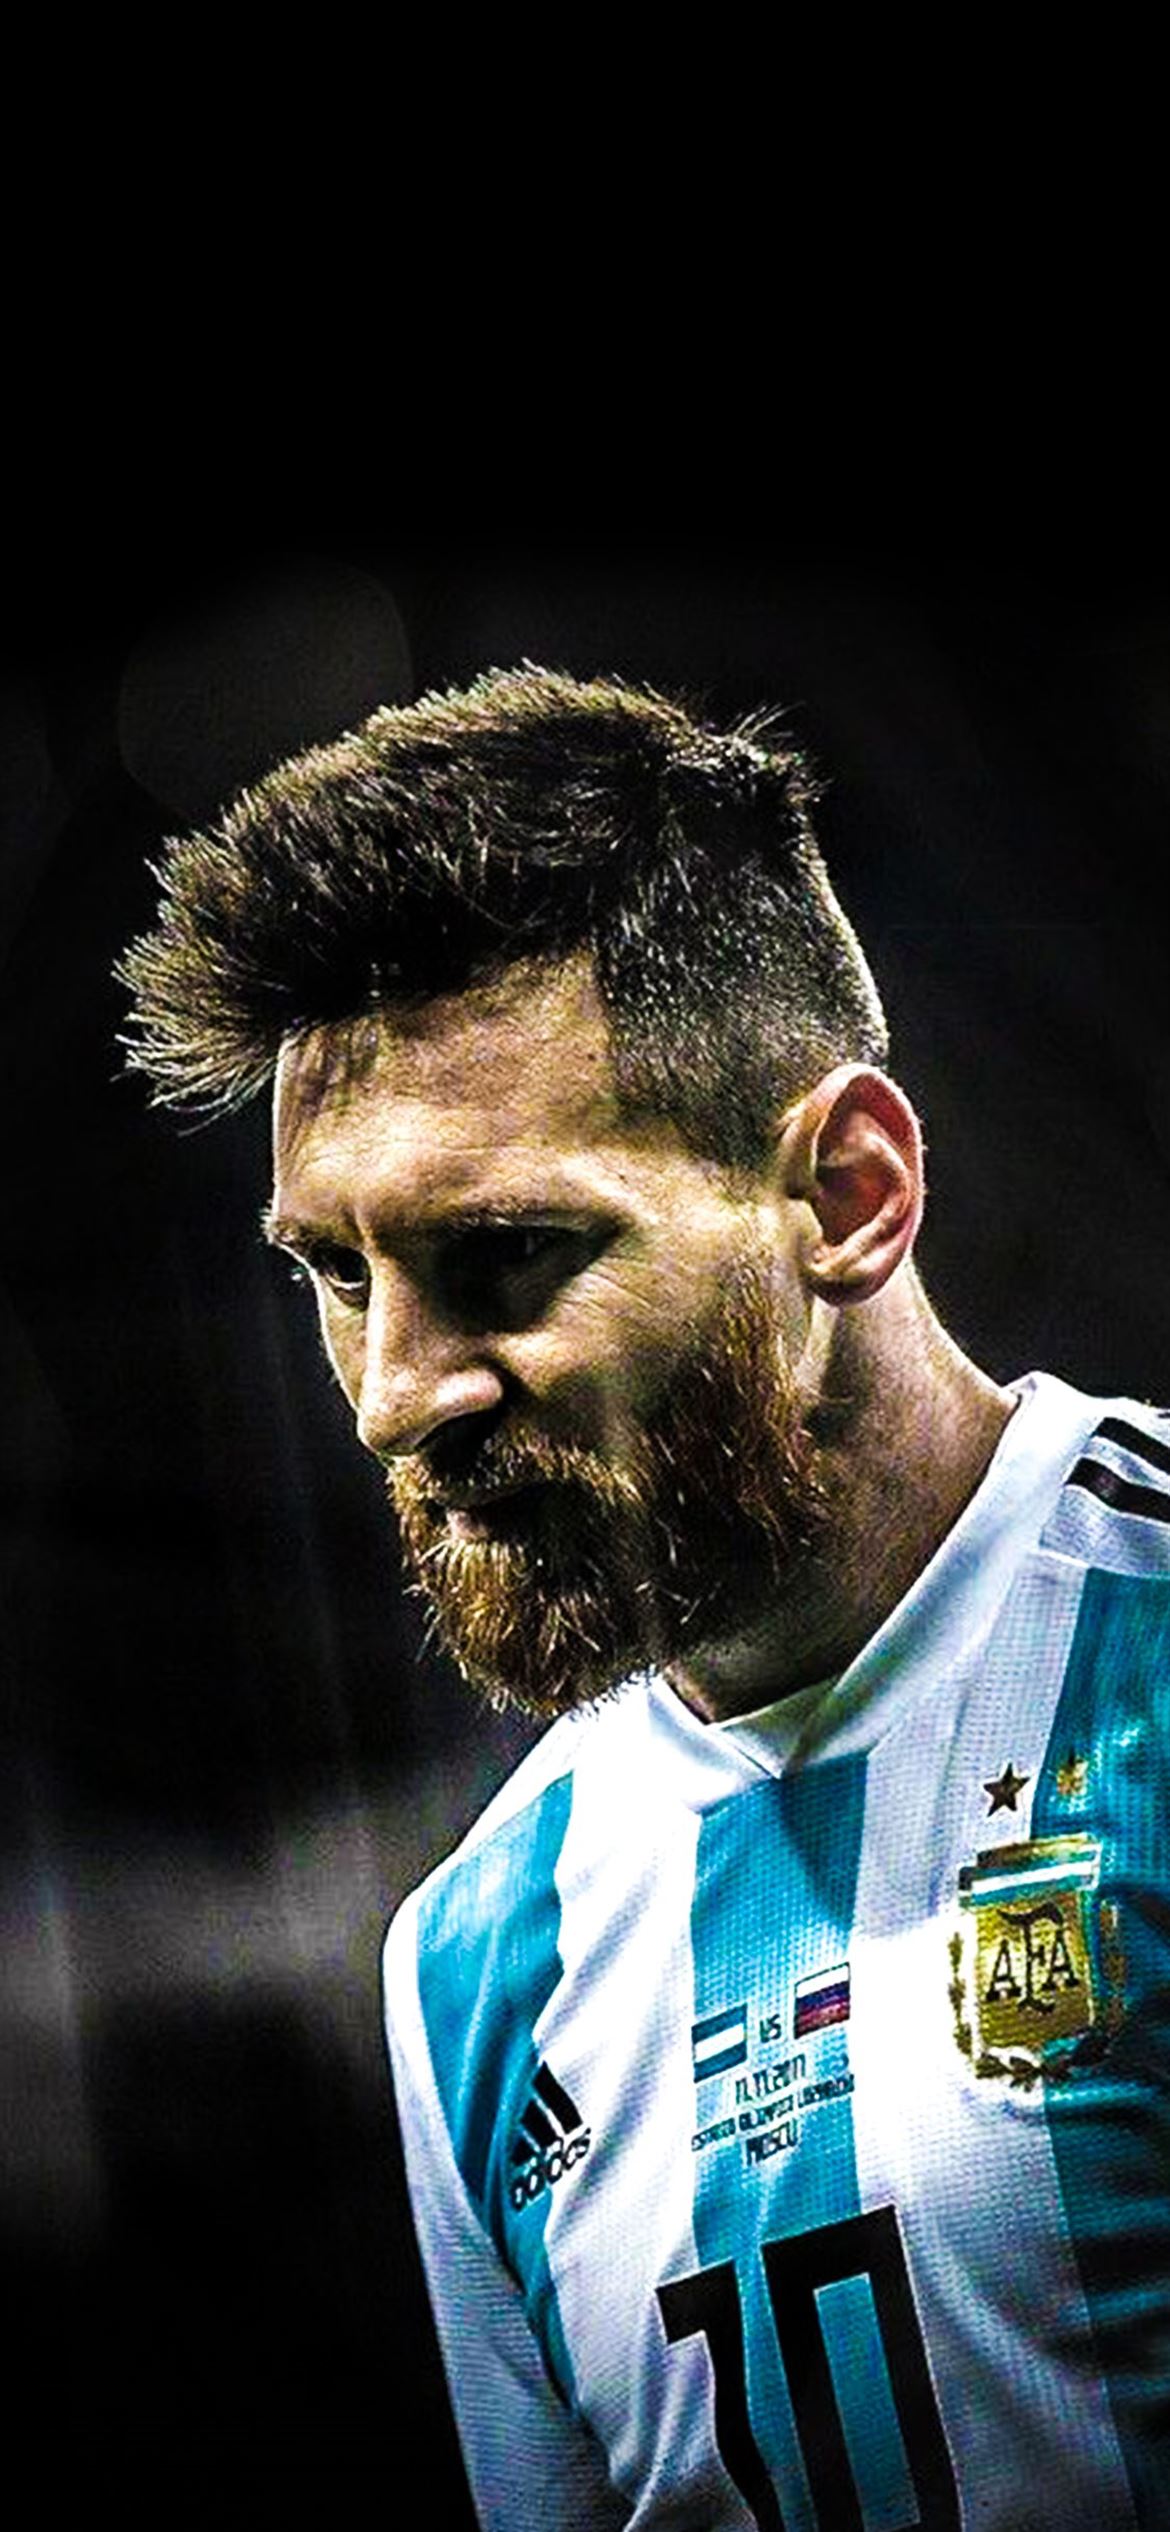 Lionel Messi FIFA Word CUP 2022 iPhone Wallpaper Free Download